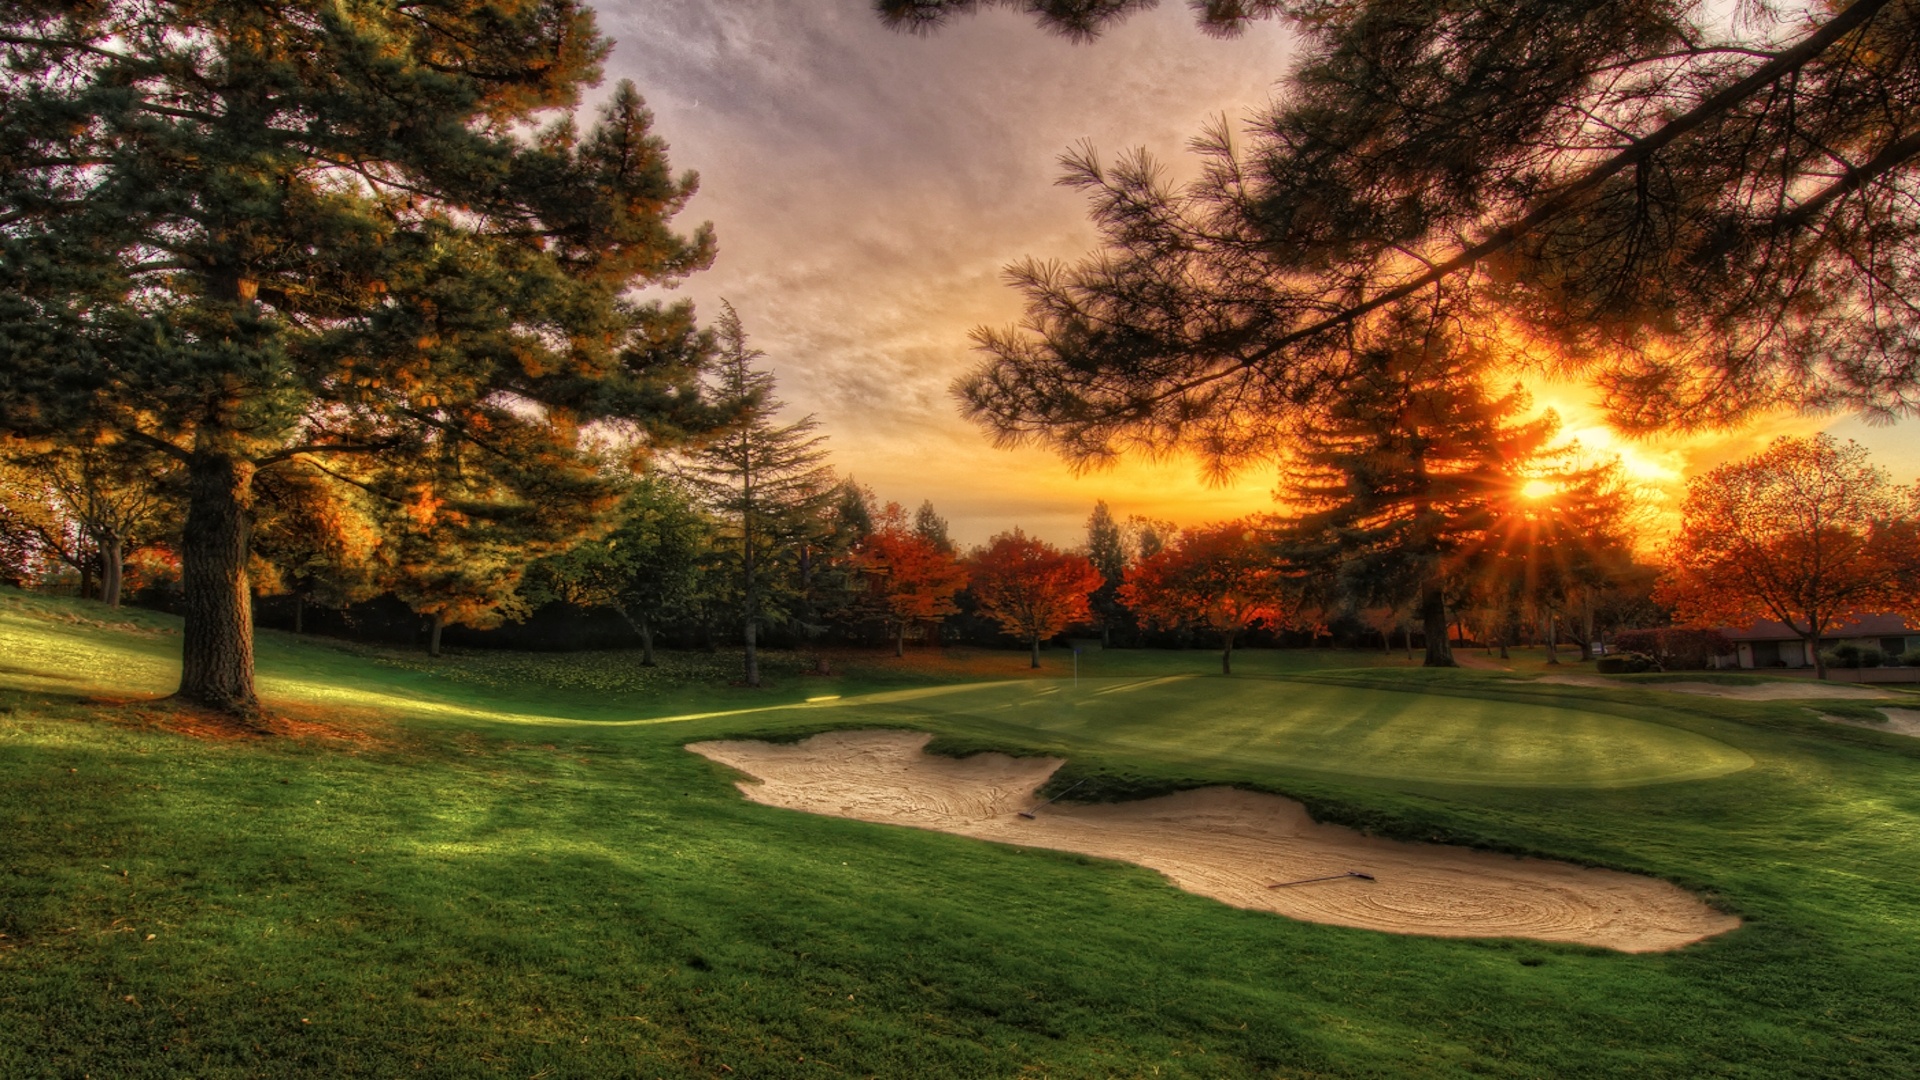 Free Golf Backgrounds Wallpapers, Backgrounds, Images, Art Photos